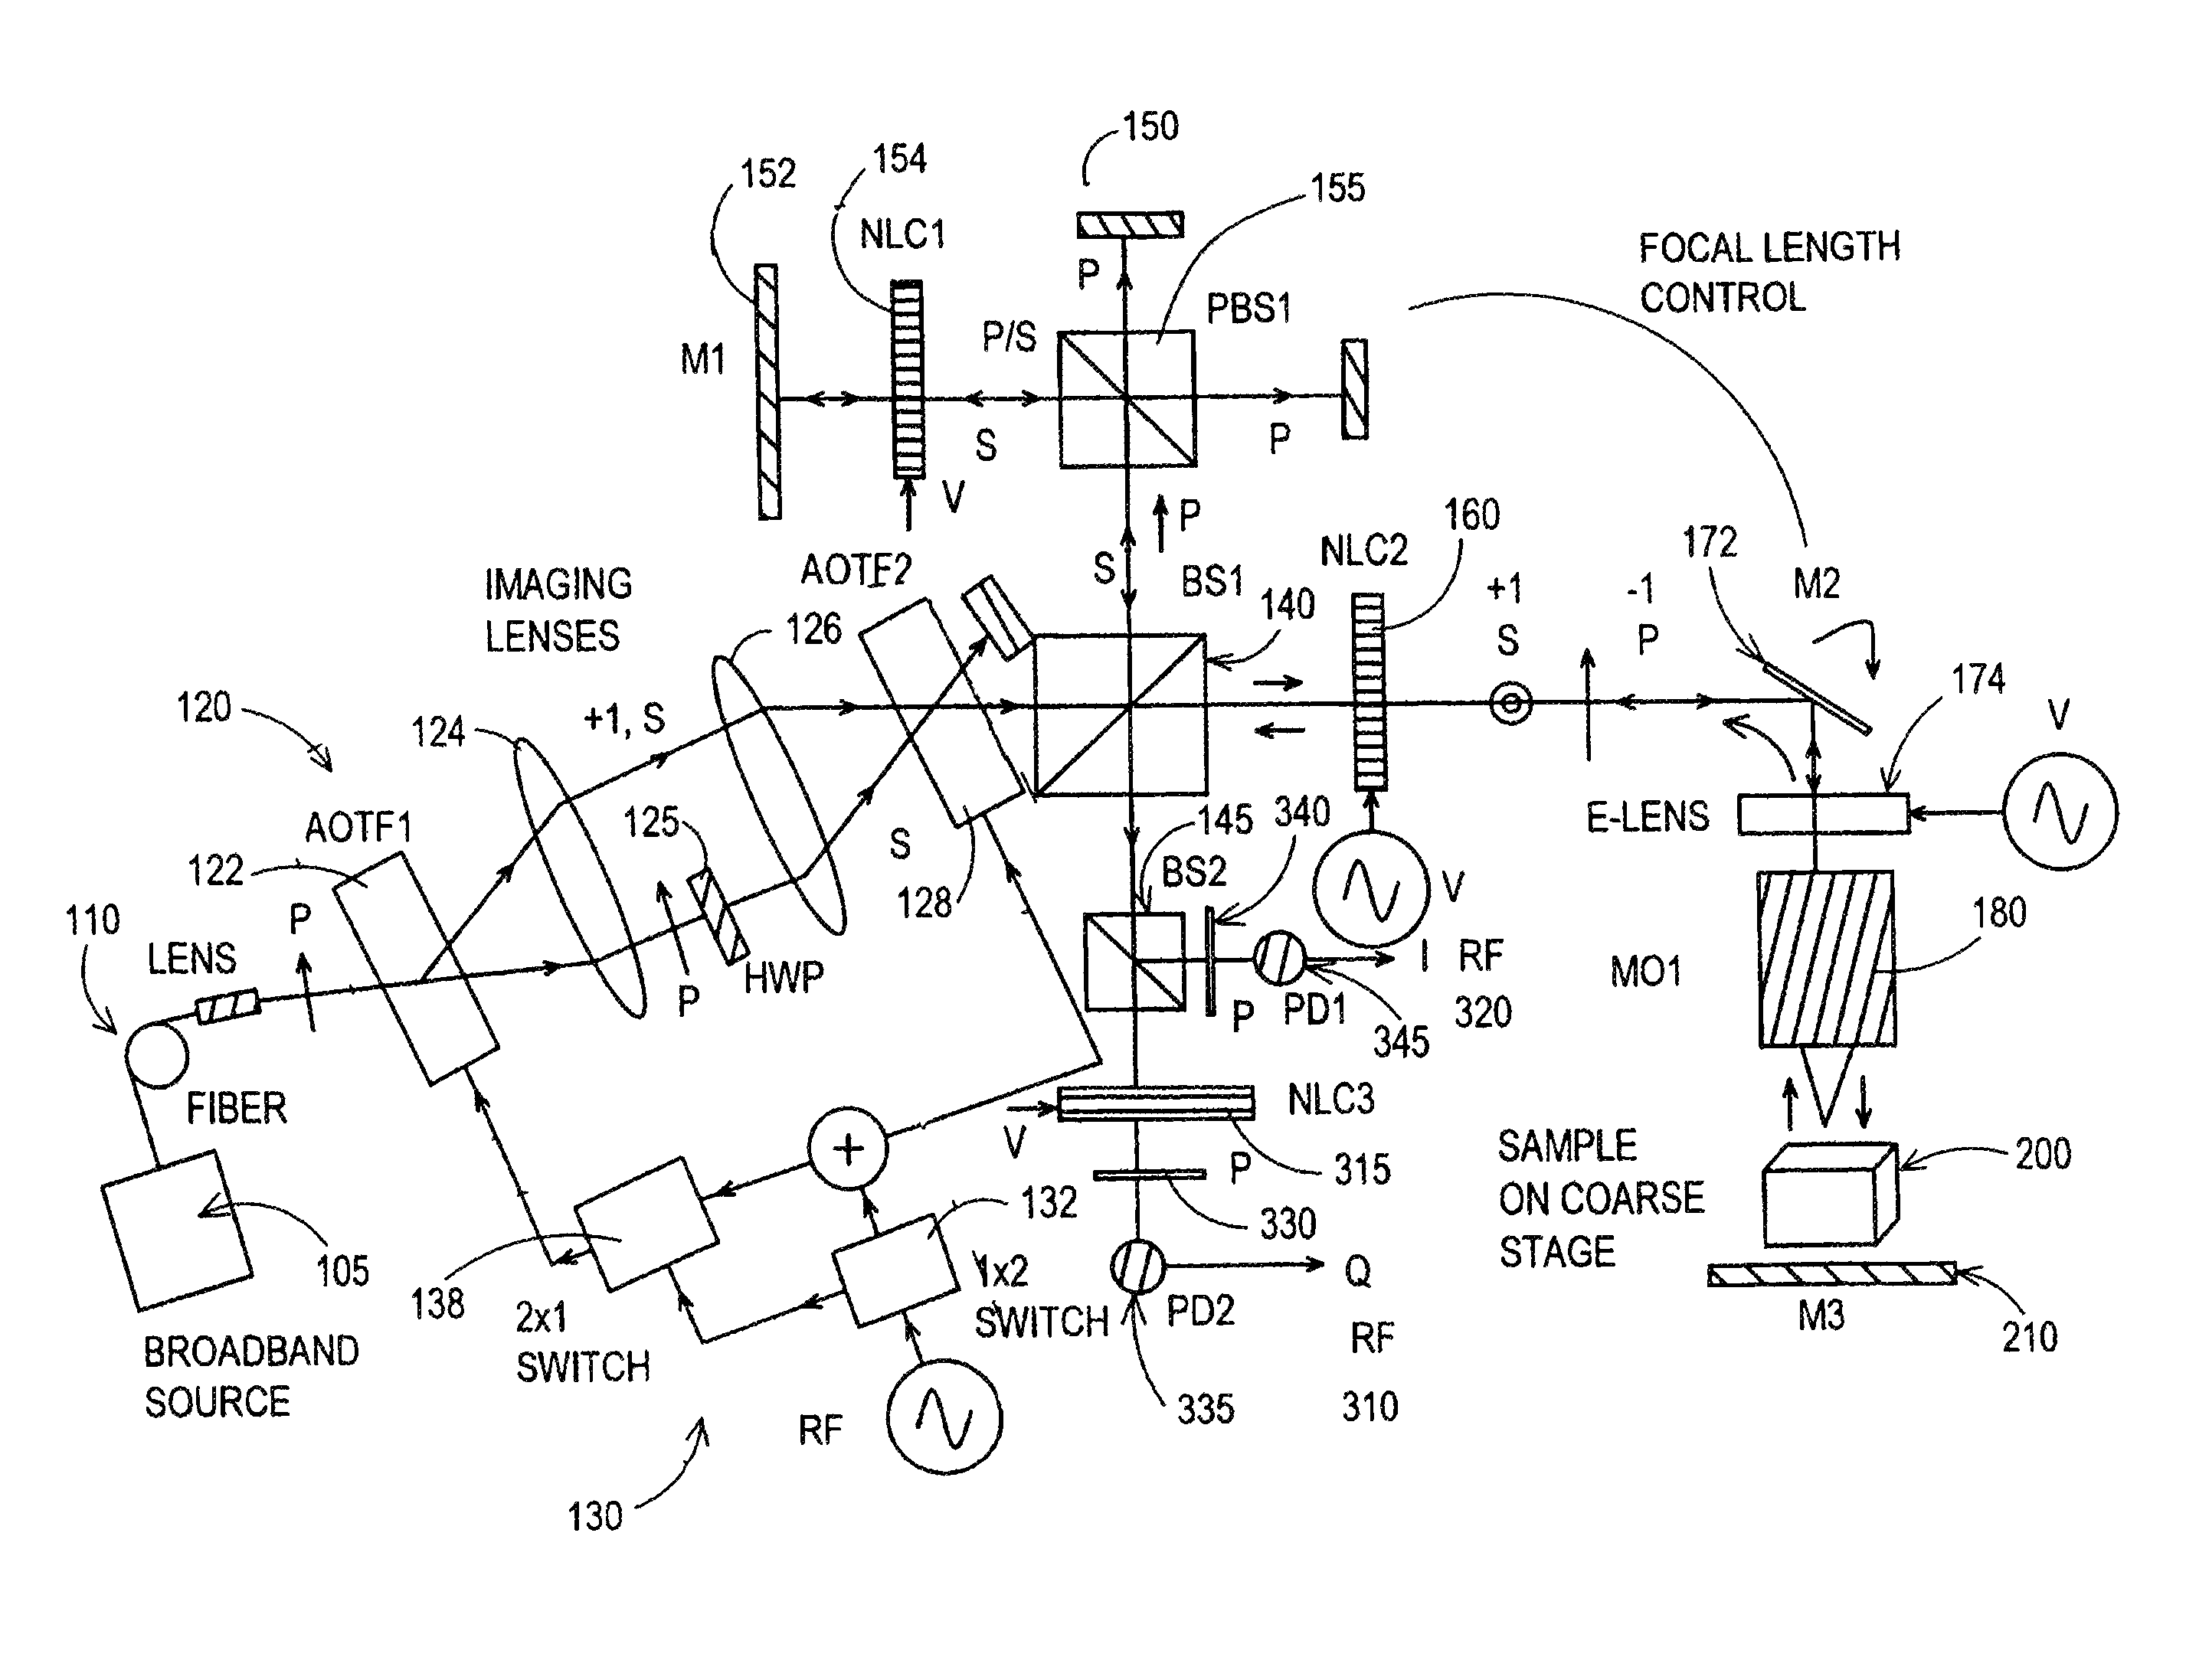 Methods and systems for realizing high resolution three-dimensional optical imaging